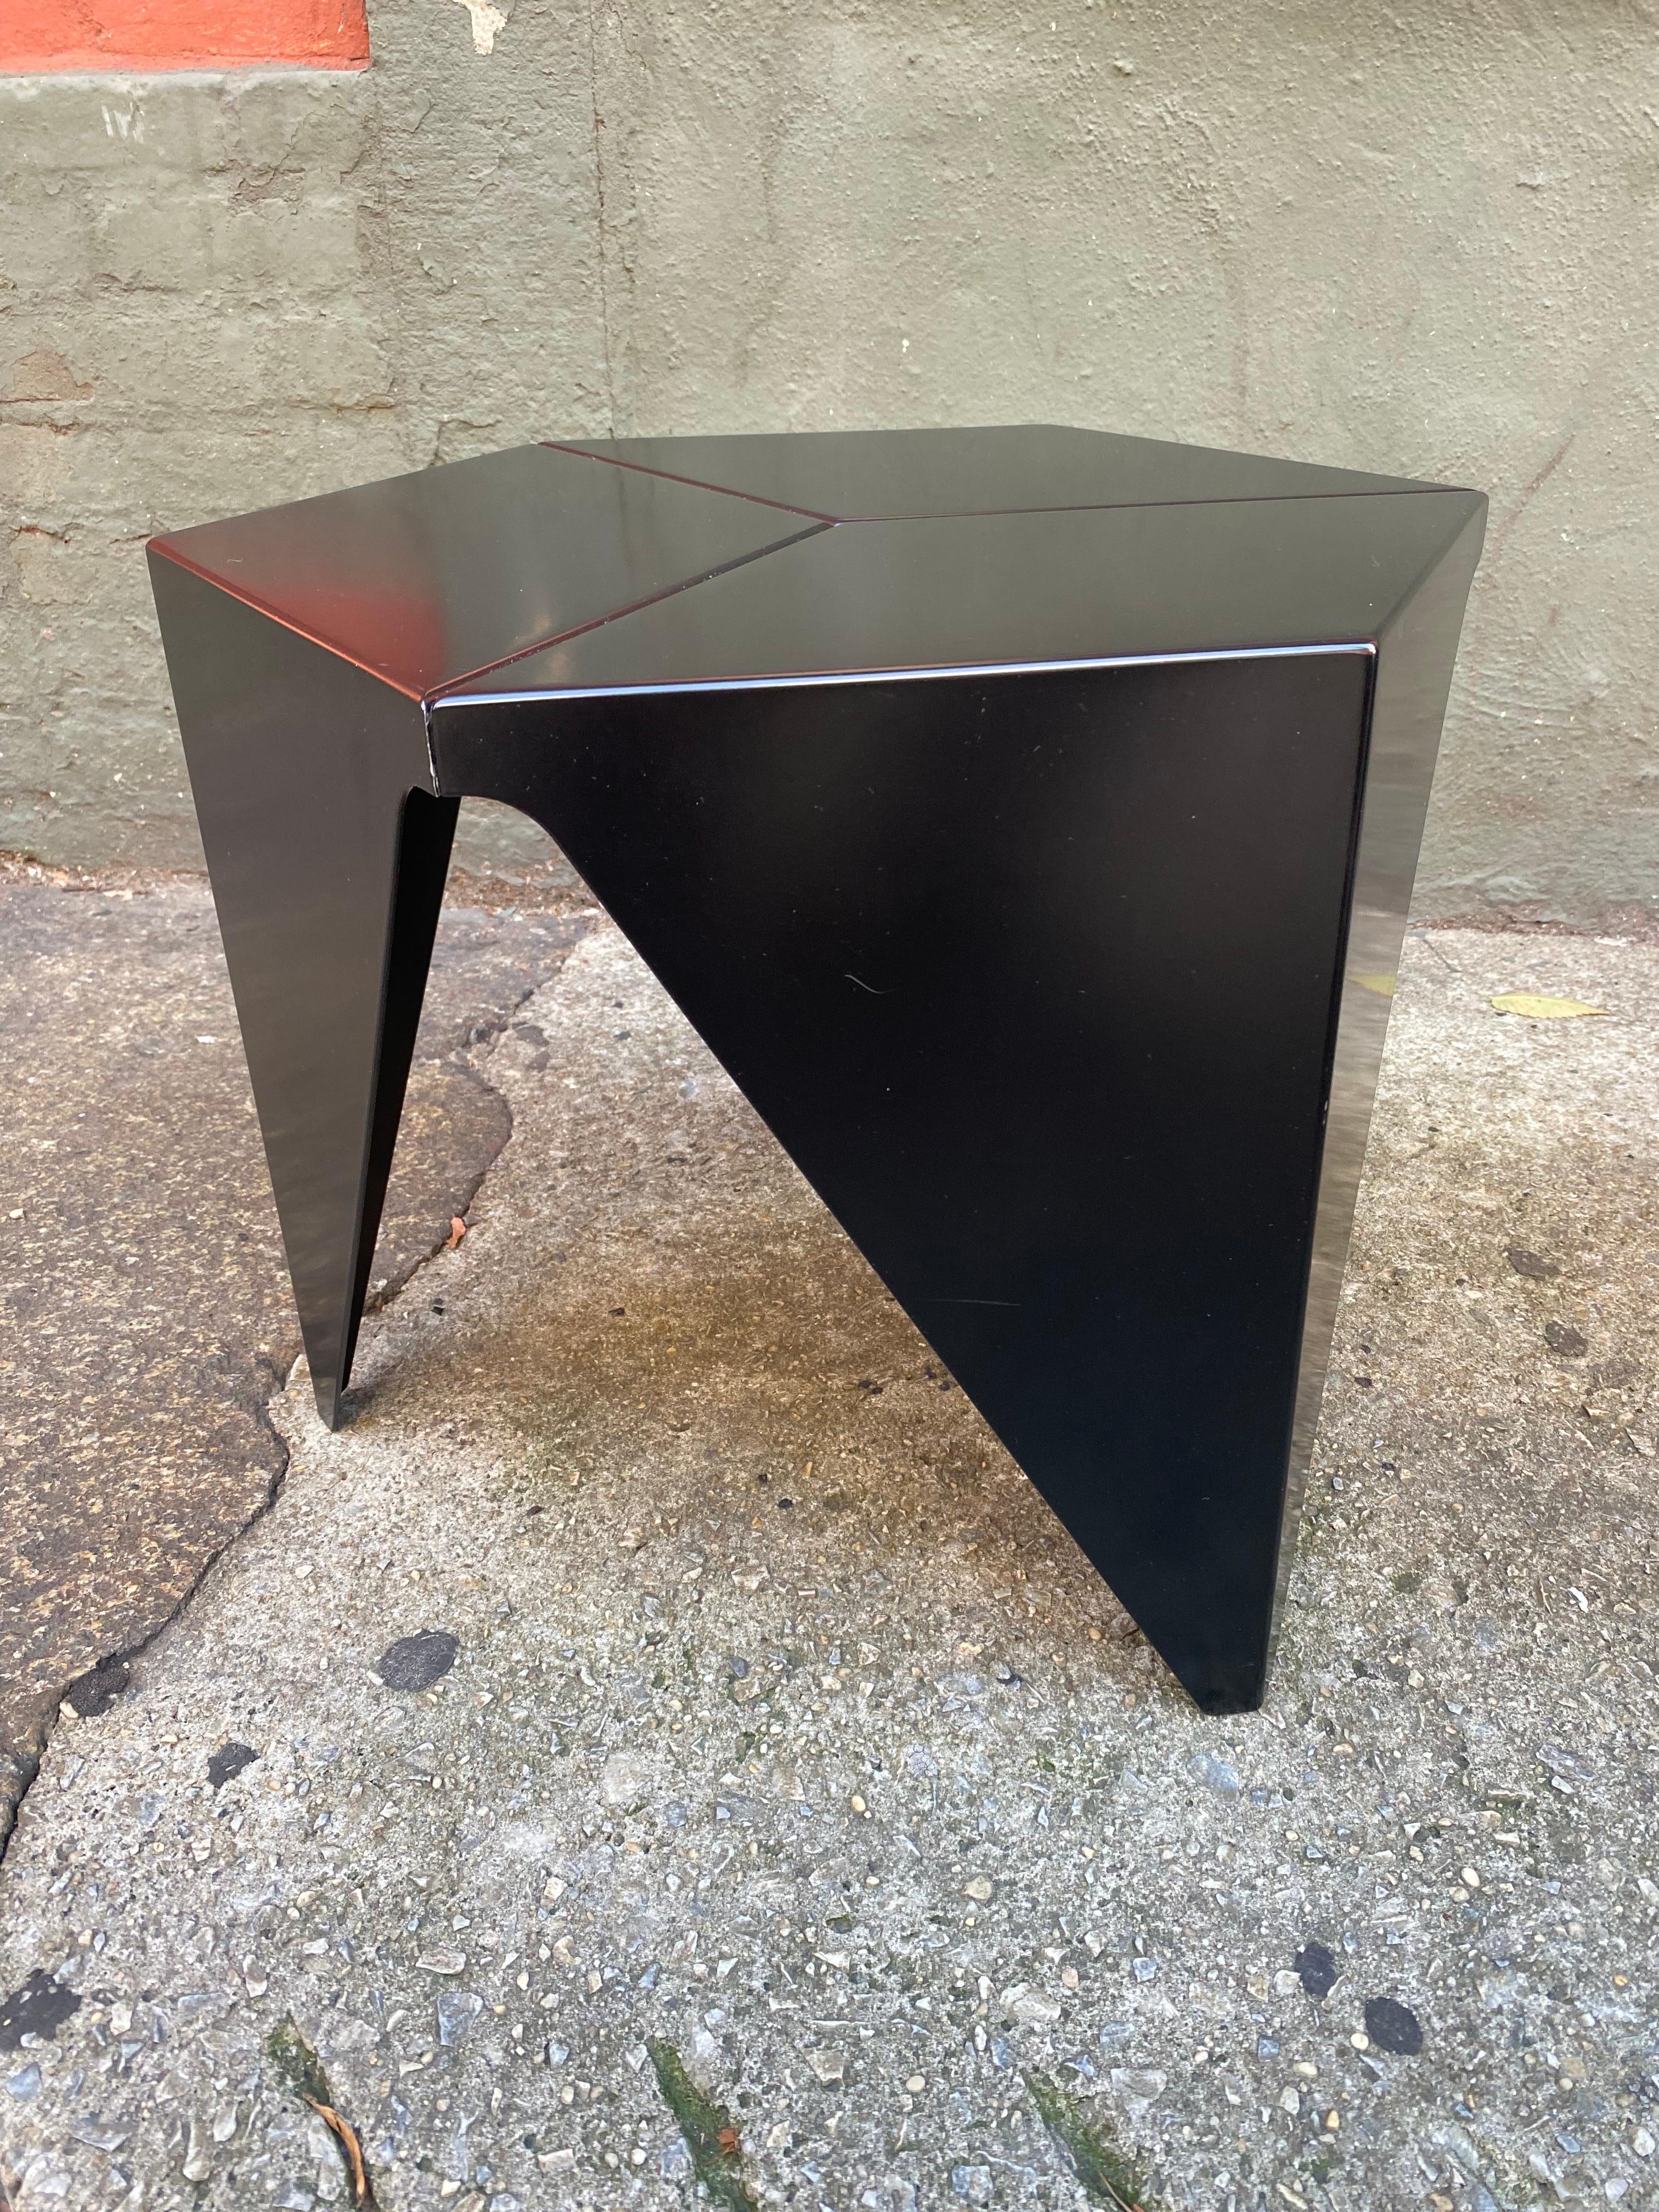 Metal Noguchi Prismatic Tables for Vitra, 2 Available, priced separately! For Sale